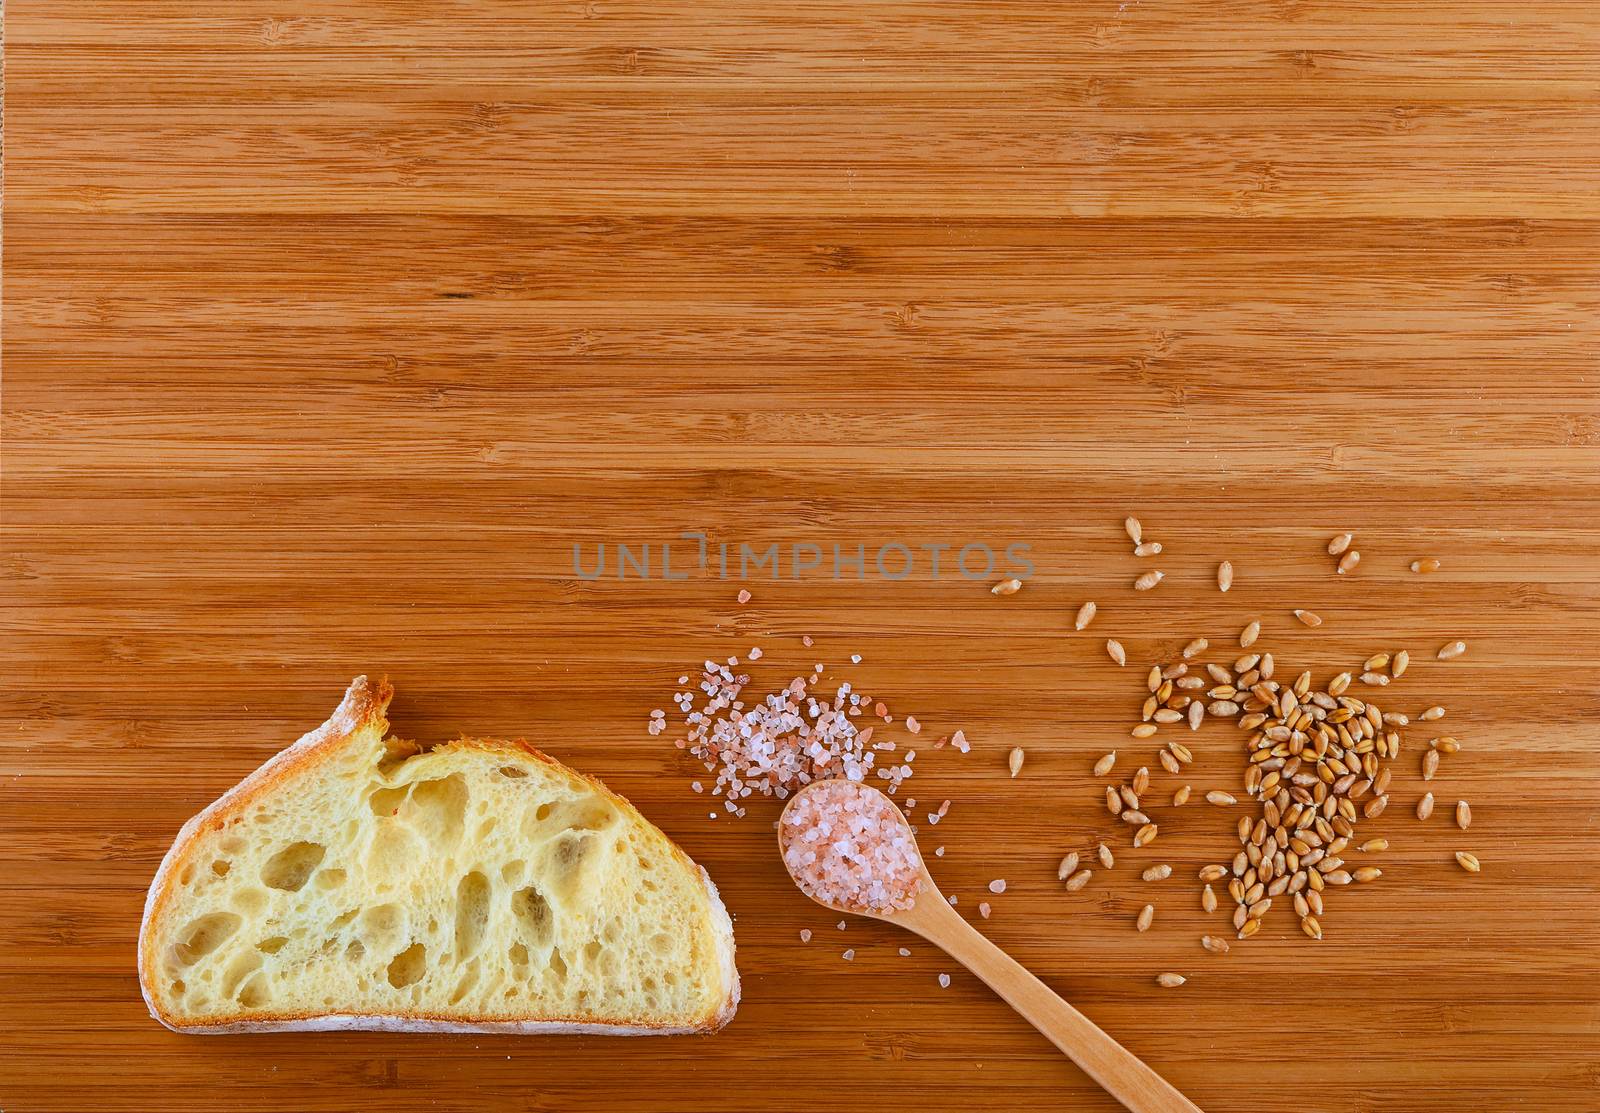 Wooden bamboo cutting board with spoon of pink Himalayan salt, handful of ripe grains and slice of bread - add your text